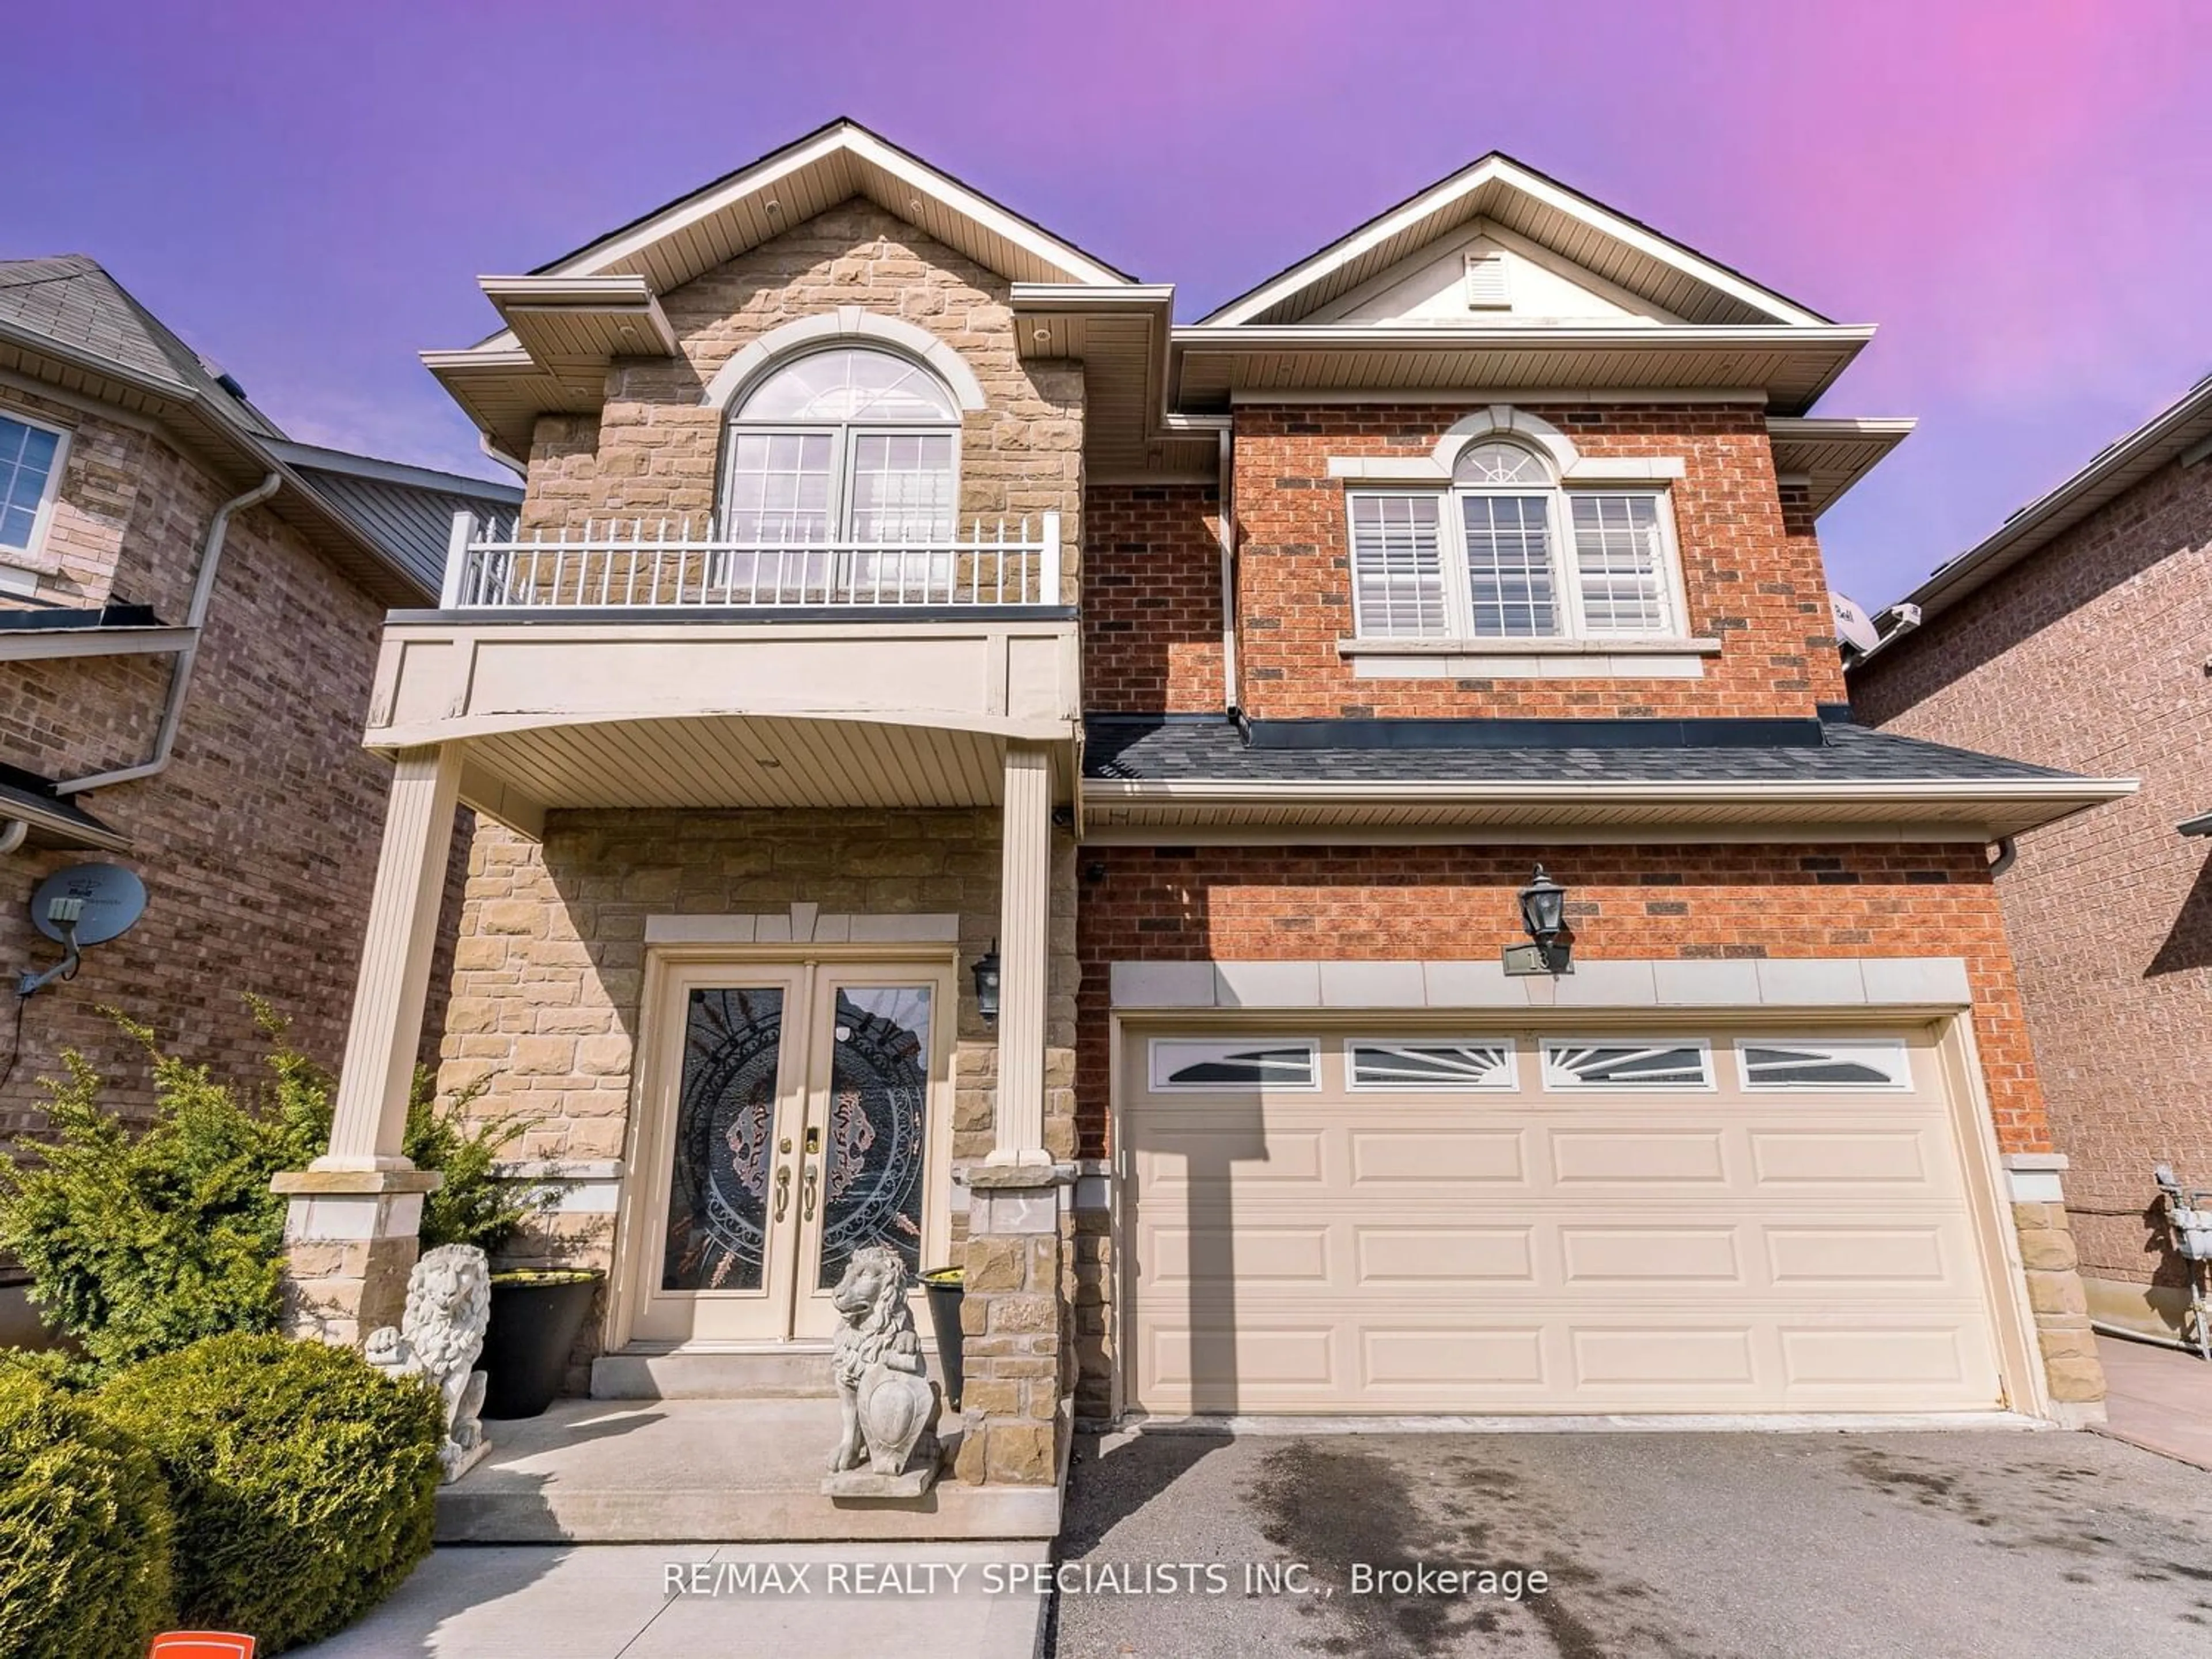 Home with brick exterior material for 13 Kirkhaven Way, Brampton Ontario L6X 0P6